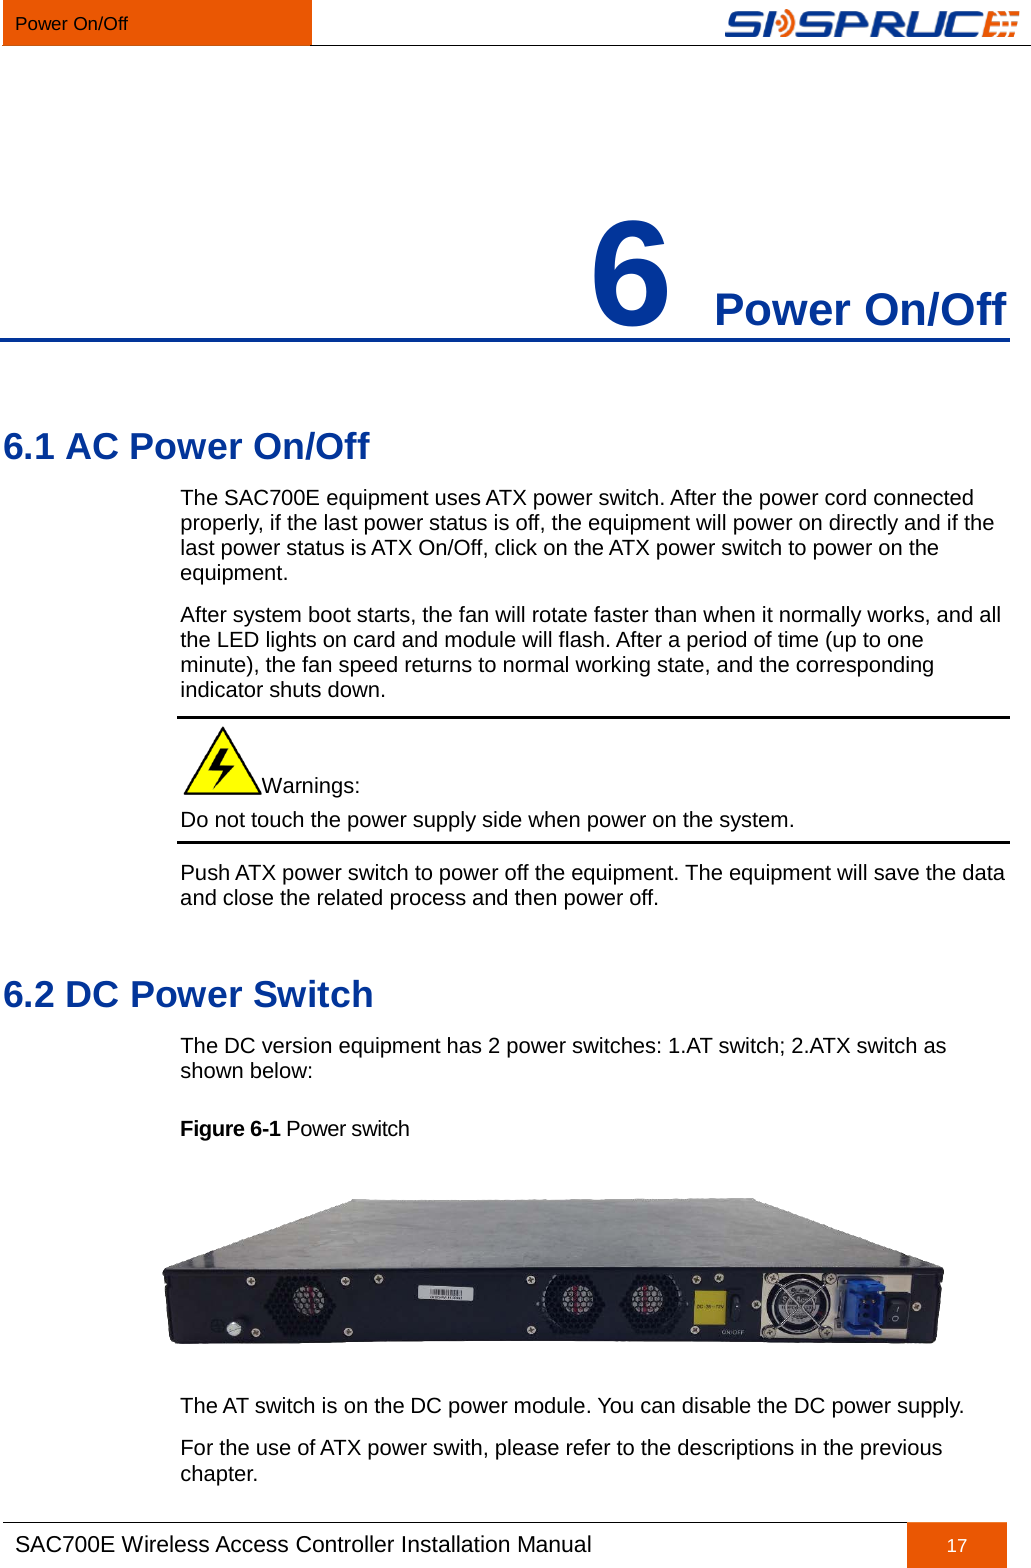 Power On/Off   SAC700E Wireless Access Controller Installation Manual 17  6 Power On/Off 6.1 AC Power On/Off The SAC700E equipment uses ATX power switch. After the power cord connected properly, if the last power status is off, the equipment will power on directly and if the last power status is ATX On/Off, click on the ATX power switch to power on the equipment. After system boot starts, the fan will rotate faster than when it normally works, and all the LED lights on card and module will flash. After a period of time (up to one minute), the fan speed returns to normal working state, and the corresponding indicator shuts down. Warnings: Do not touch the power supply side when power on the system. Push ATX power switch to power off the equipment. The equipment will save the data and close the related process and then power off. 6.2 DC Power Switch The DC version equipment has 2 power switches: 1.AT switch; 2.ATX switch as shown below: Figure 6-1 Power switch  The AT switch is on the DC power module. You can disable the DC power supply. For the use of ATX power swith, please refer to the descriptions in the previous chapter.   